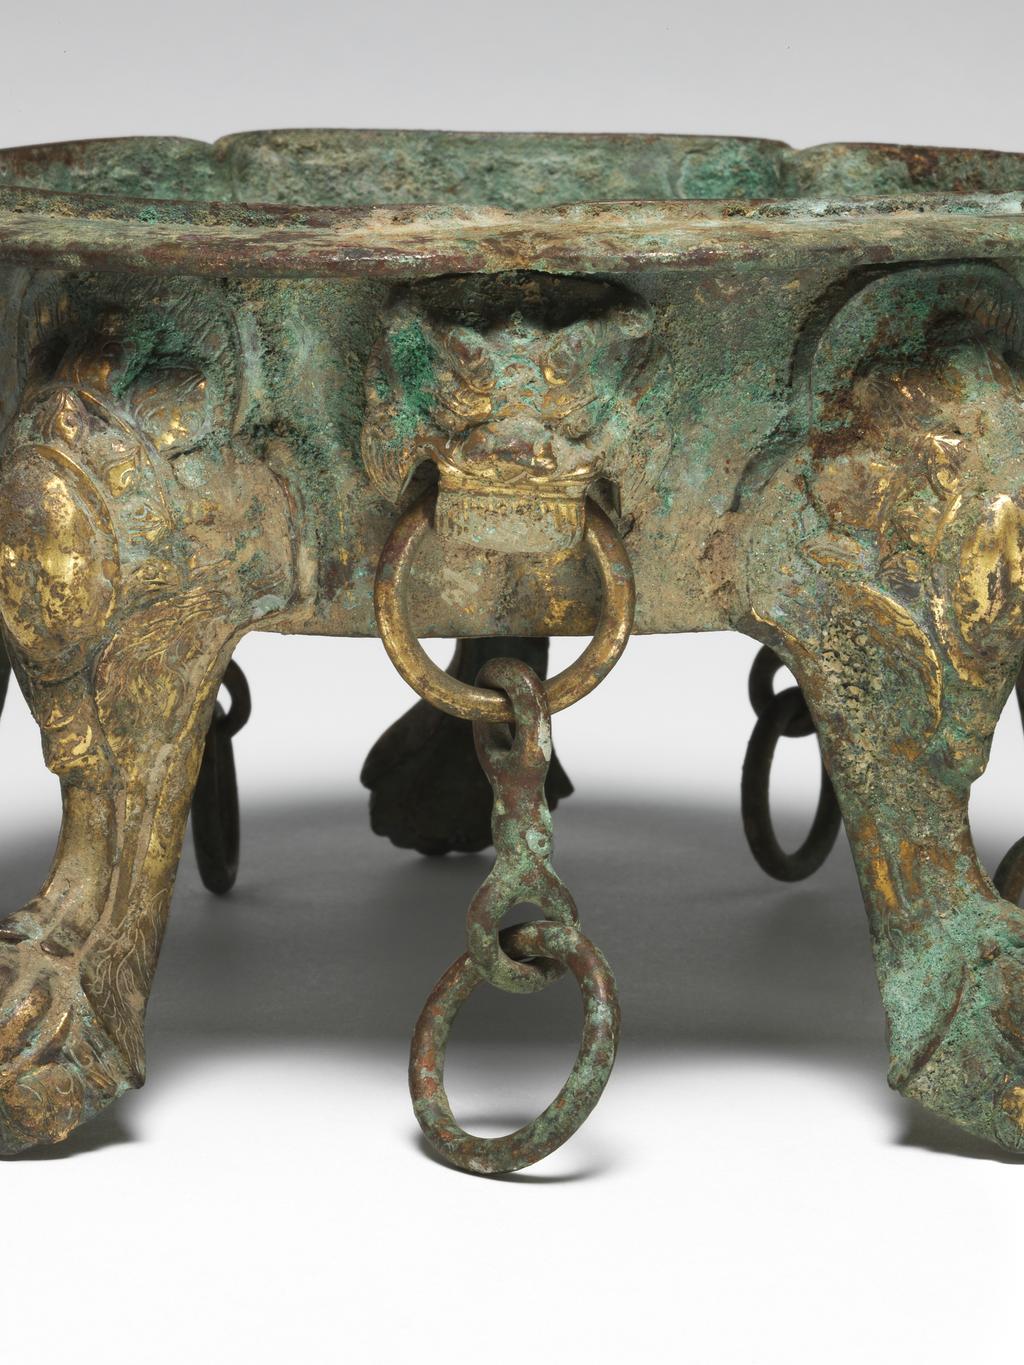 An image of Gilt-bronze censer, cast and supported on four cabriole legs, rising to an everted five-lobed rim, pierced through the sides with monster-face brackets suspending chains between each leg. Chinese, Tang dynasty. Circa 618 to 907 A.D.